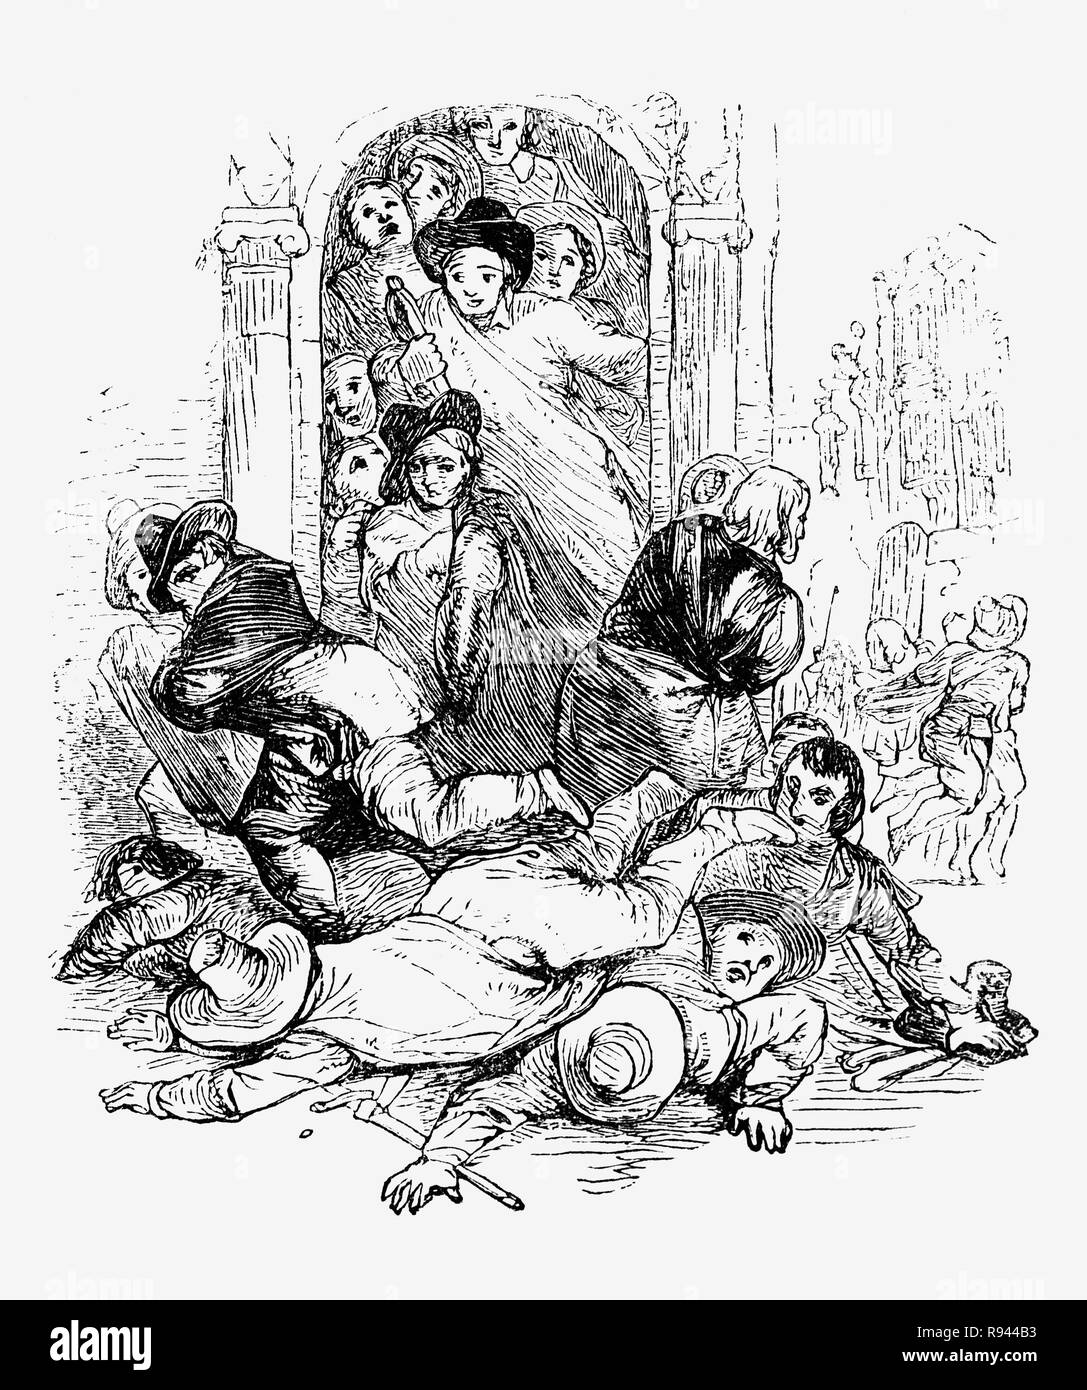 A scene from Hudibras, an English satirical polemic written by Samuel Butler(1613 – 1680), poet and satirist, mostly against Parliamenterians,Roundheads, Puritans, Presbyterians and other factions involved in the English Civil War of 1642-1651.  The Independents formed a majority of the Rump Parliament and the news of public opinion for the restoration (of King Charles II). puts them into a frenzy of alarm. Stock Photo